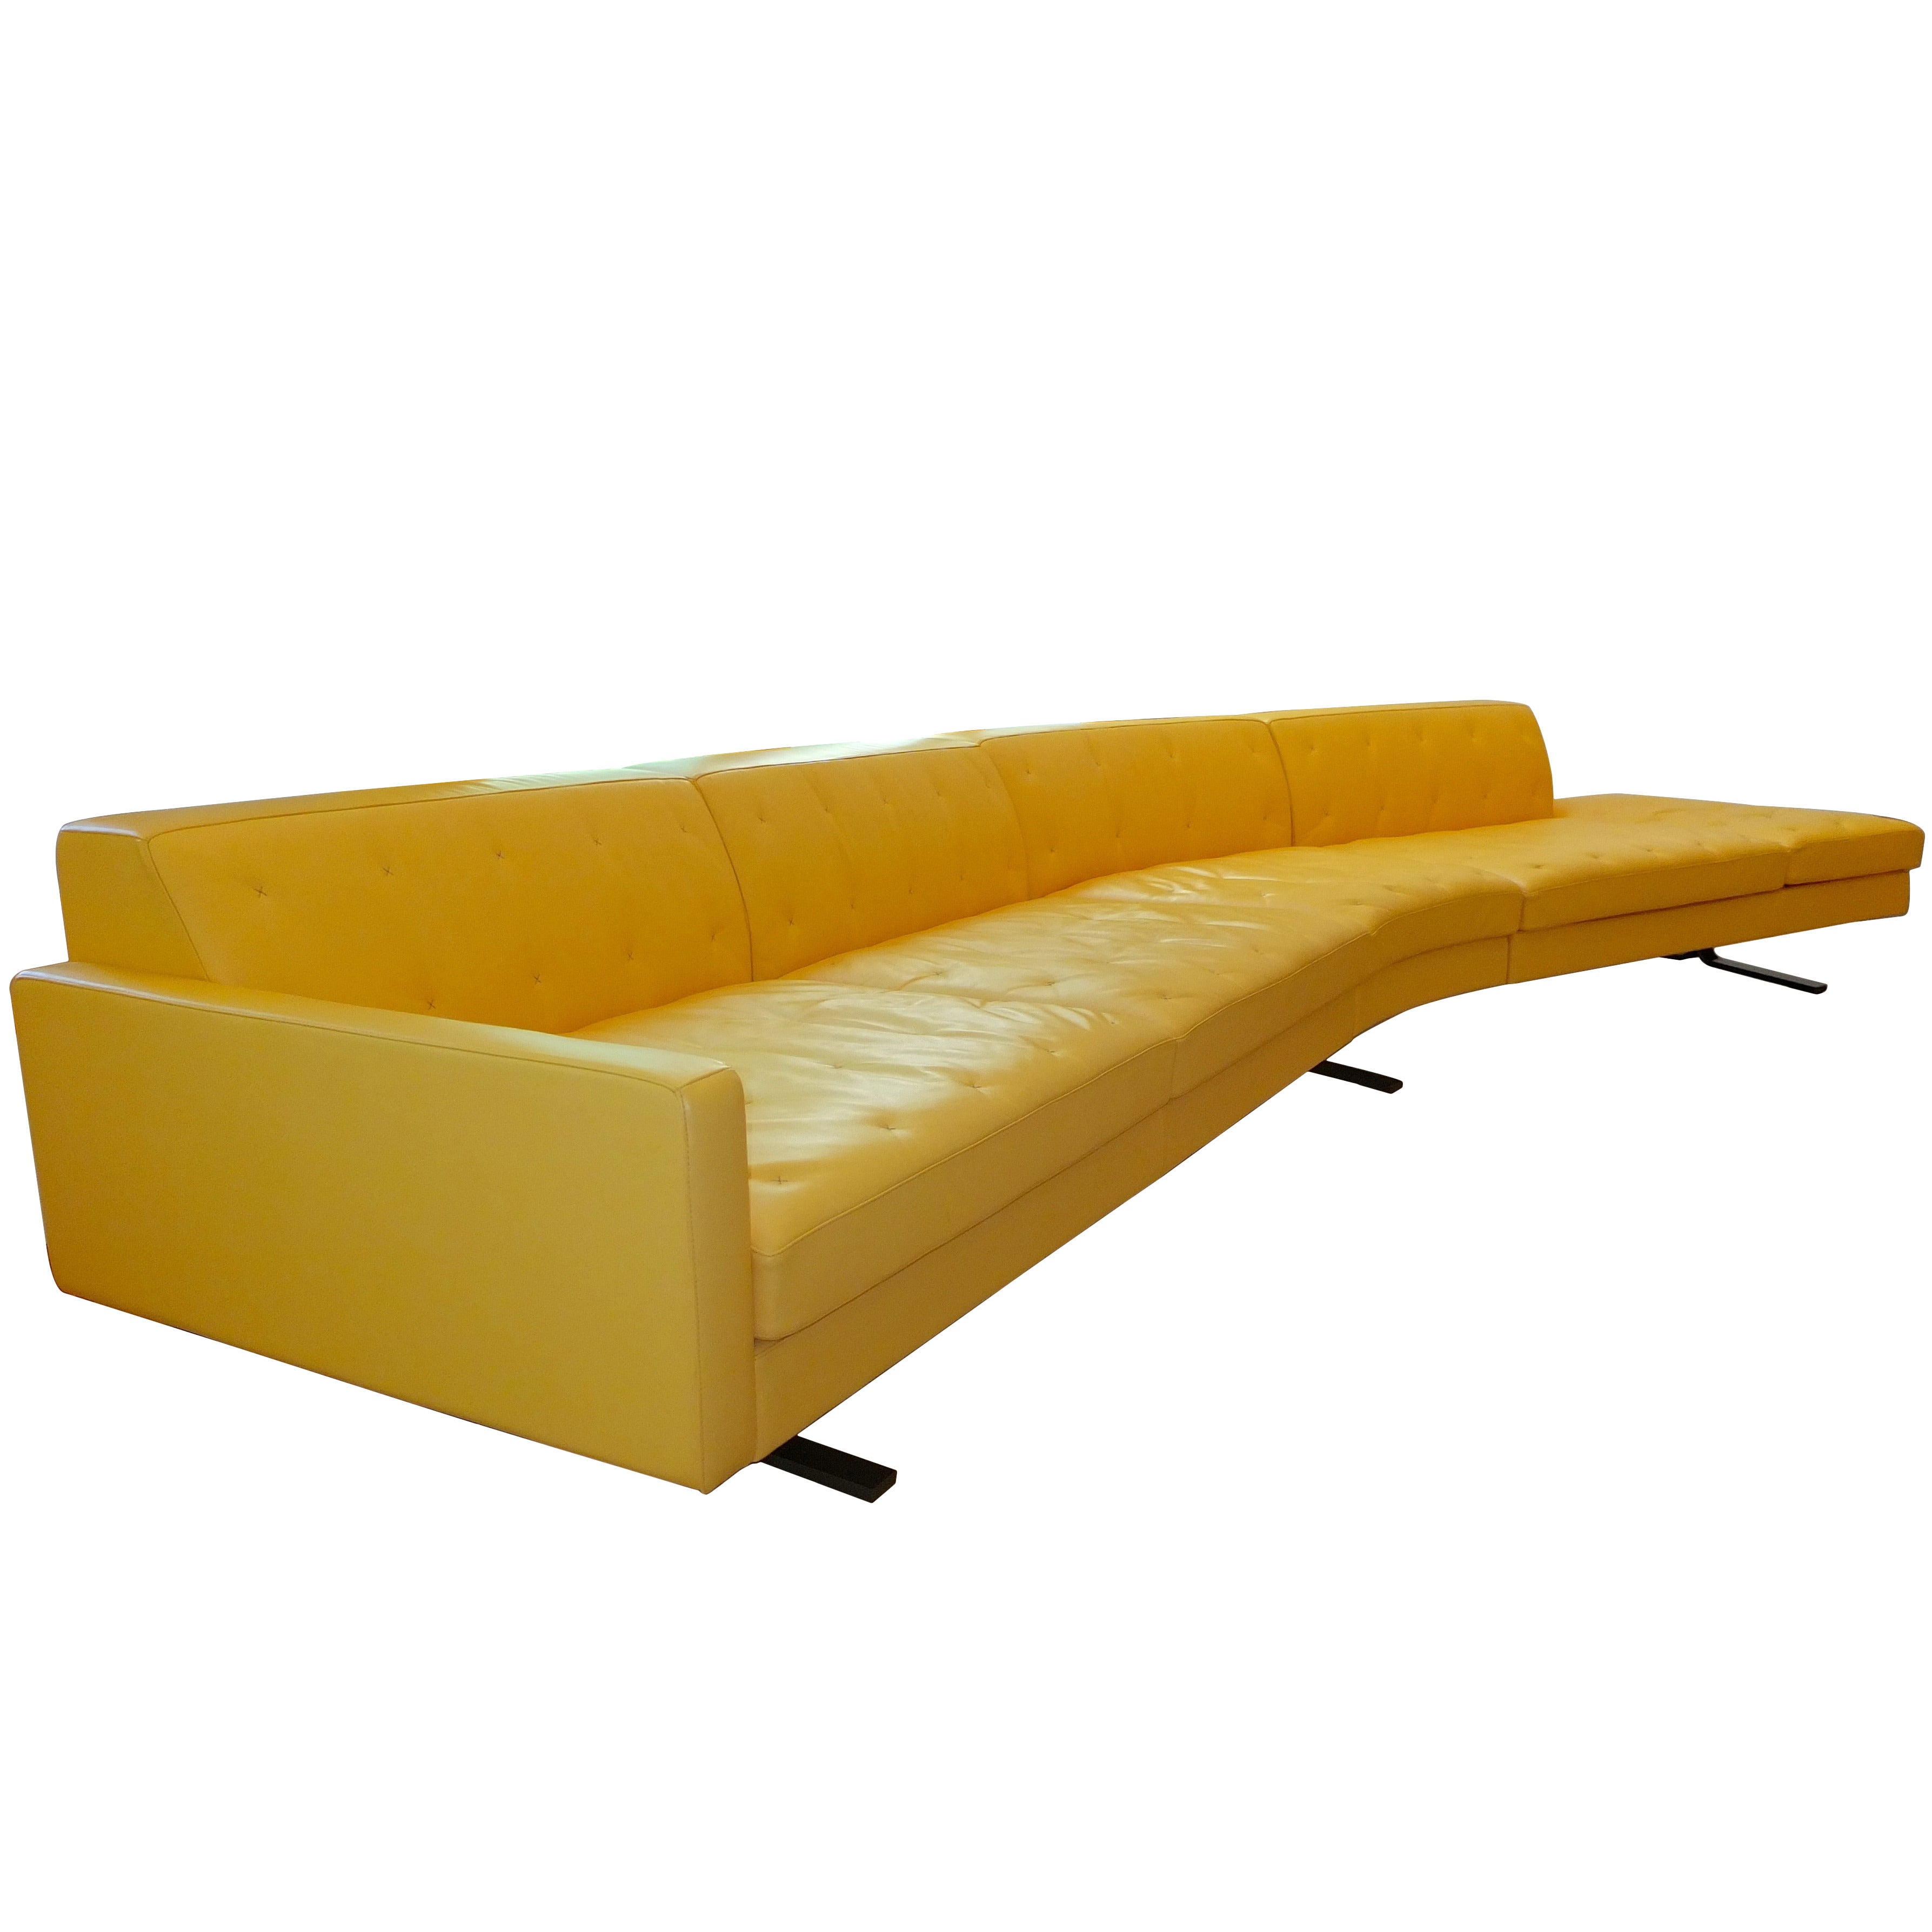 "Kennedee" Yellow Leather Sofa by Jean-Marie Massaud for Poltrona Frau